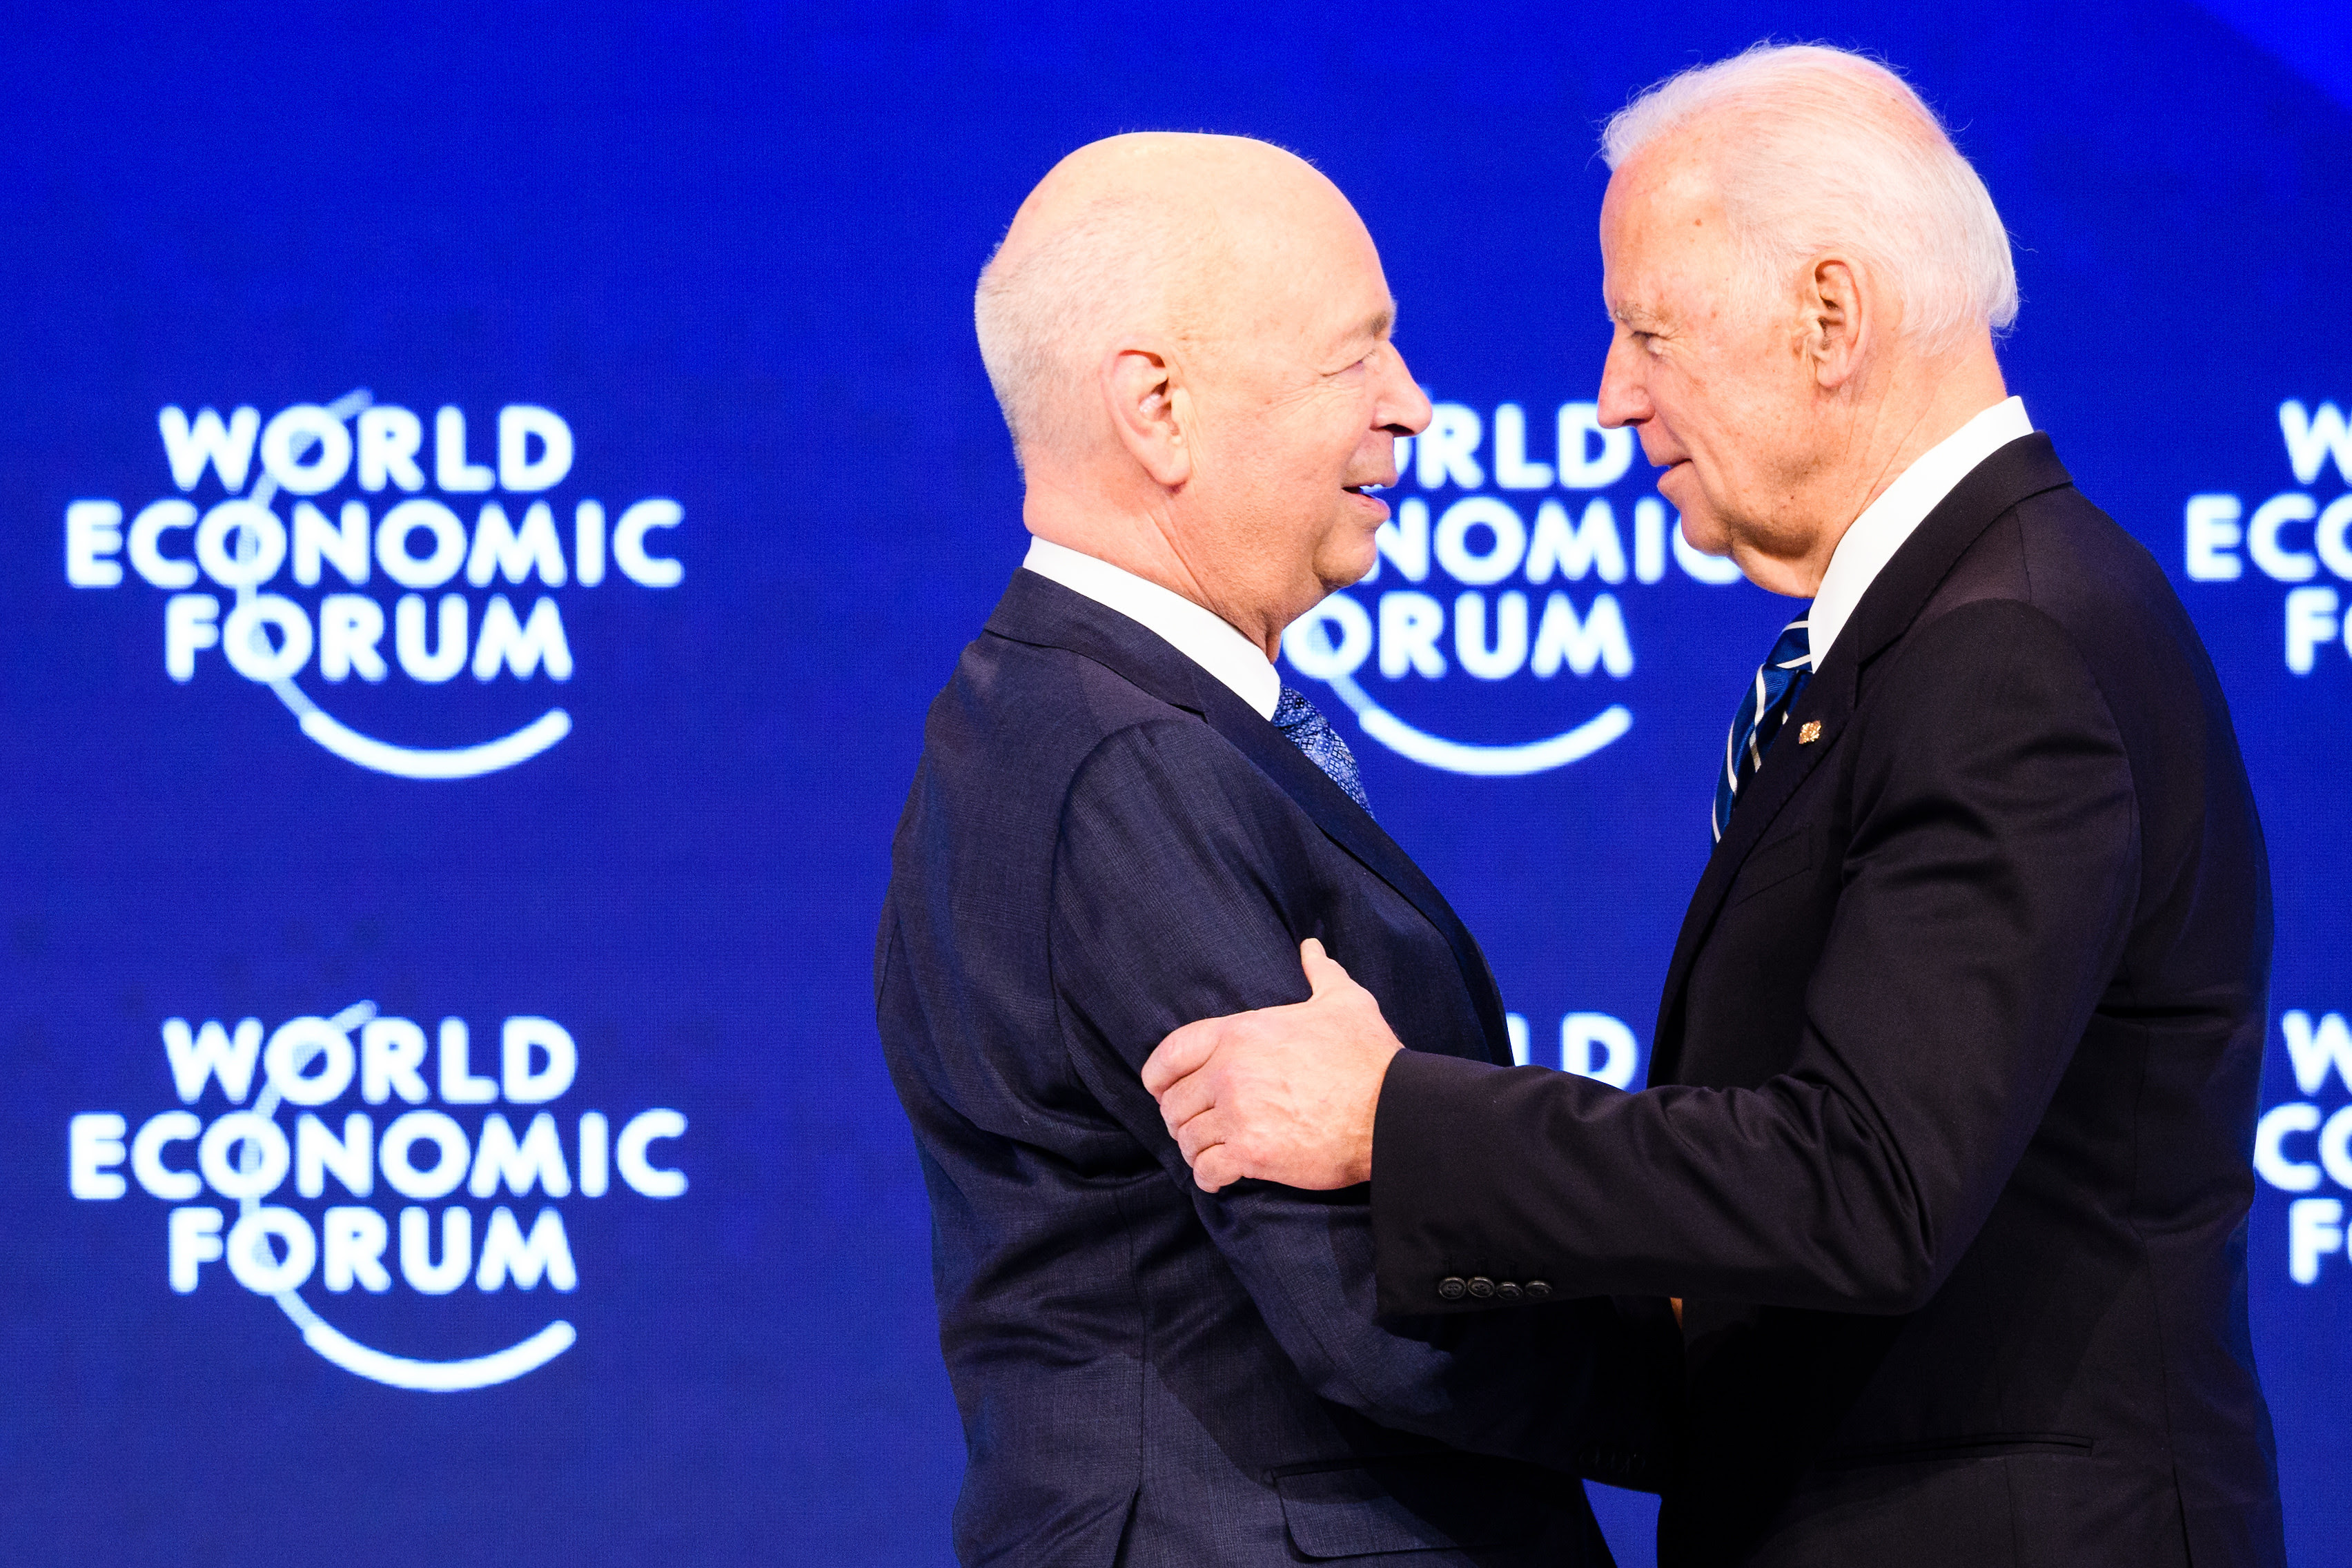 Klaus Schwab, Founder and Executive Chairman, World Economic Forum; Joseph R. Biden Jr, Vice-President of the United States of America at the Annual Meeting 2017 of the World Economic Forum in Davos, January 18, 2017.Copyright by World Economic Forum / Manuel Lopez 